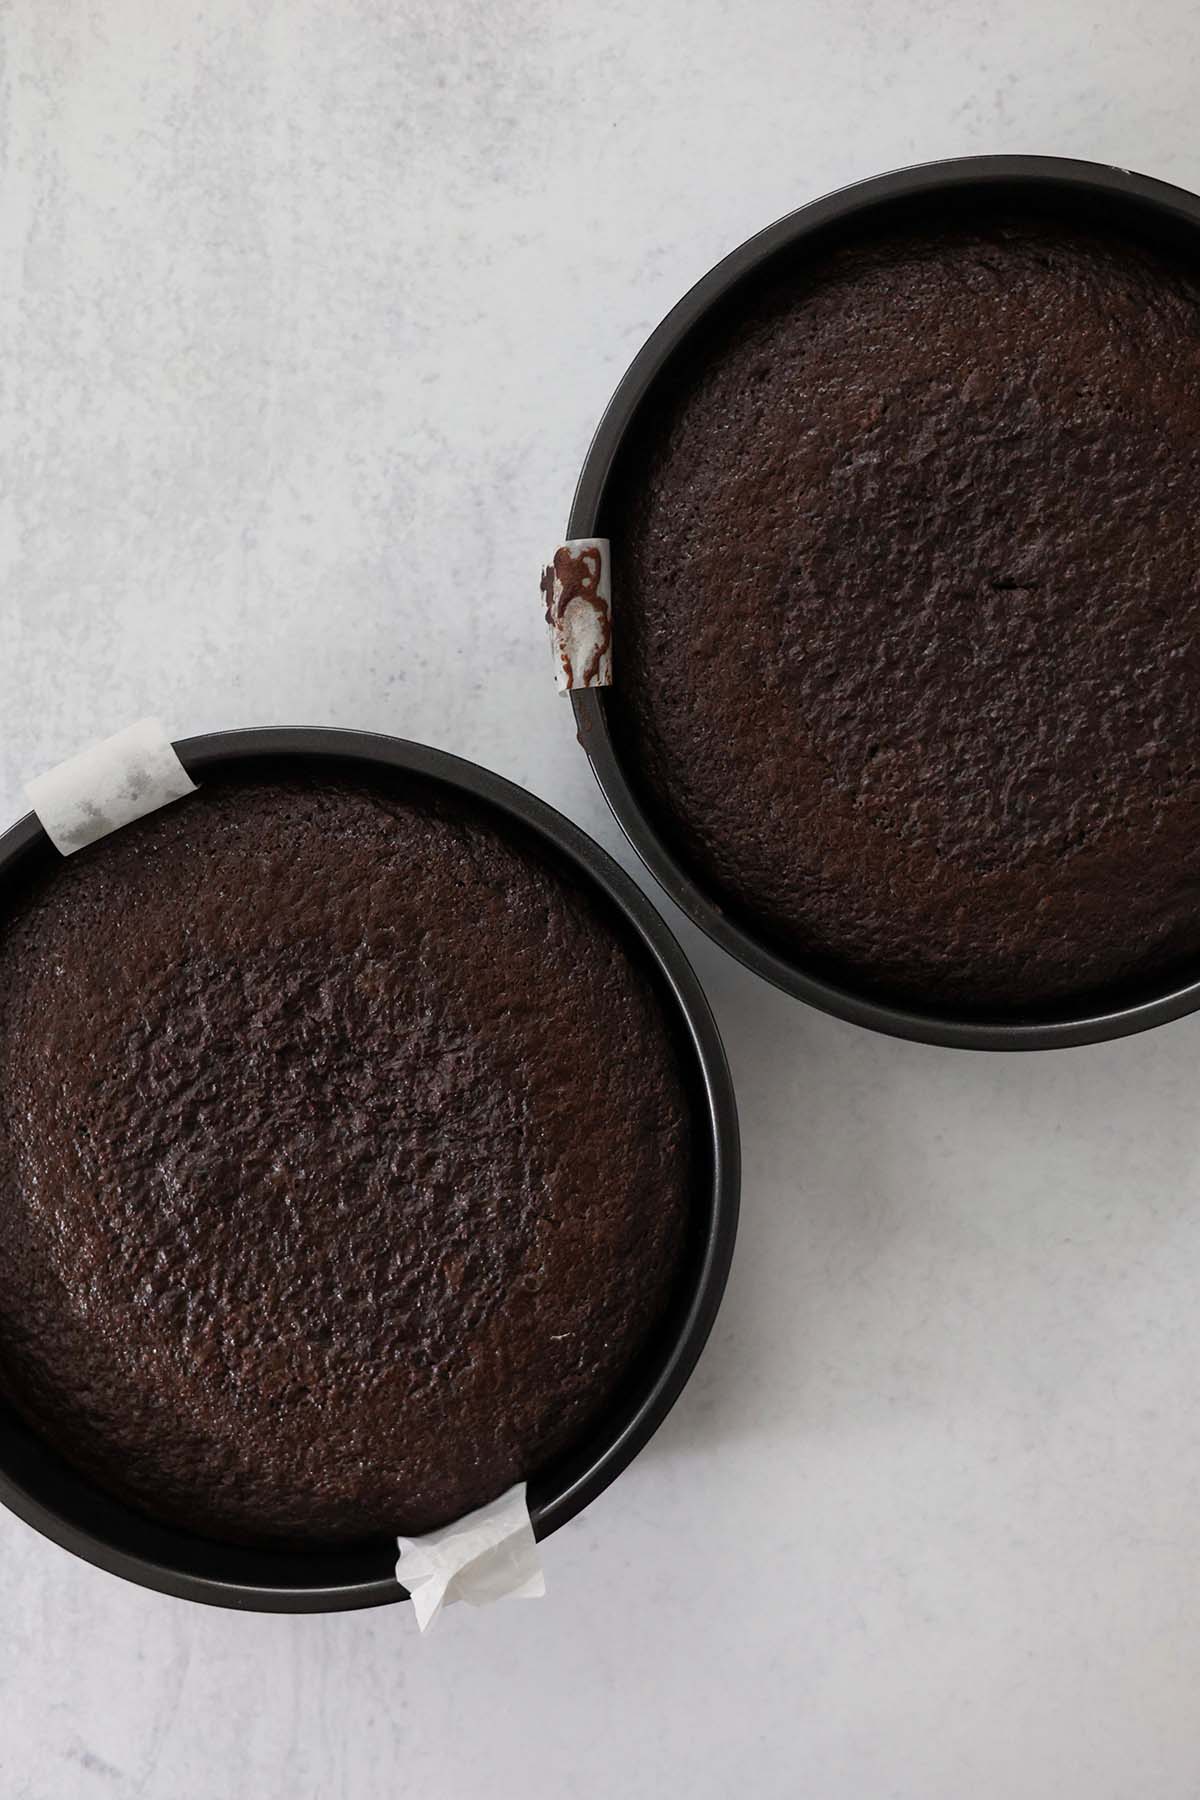 Two nine inch baked chocolate cakes. 